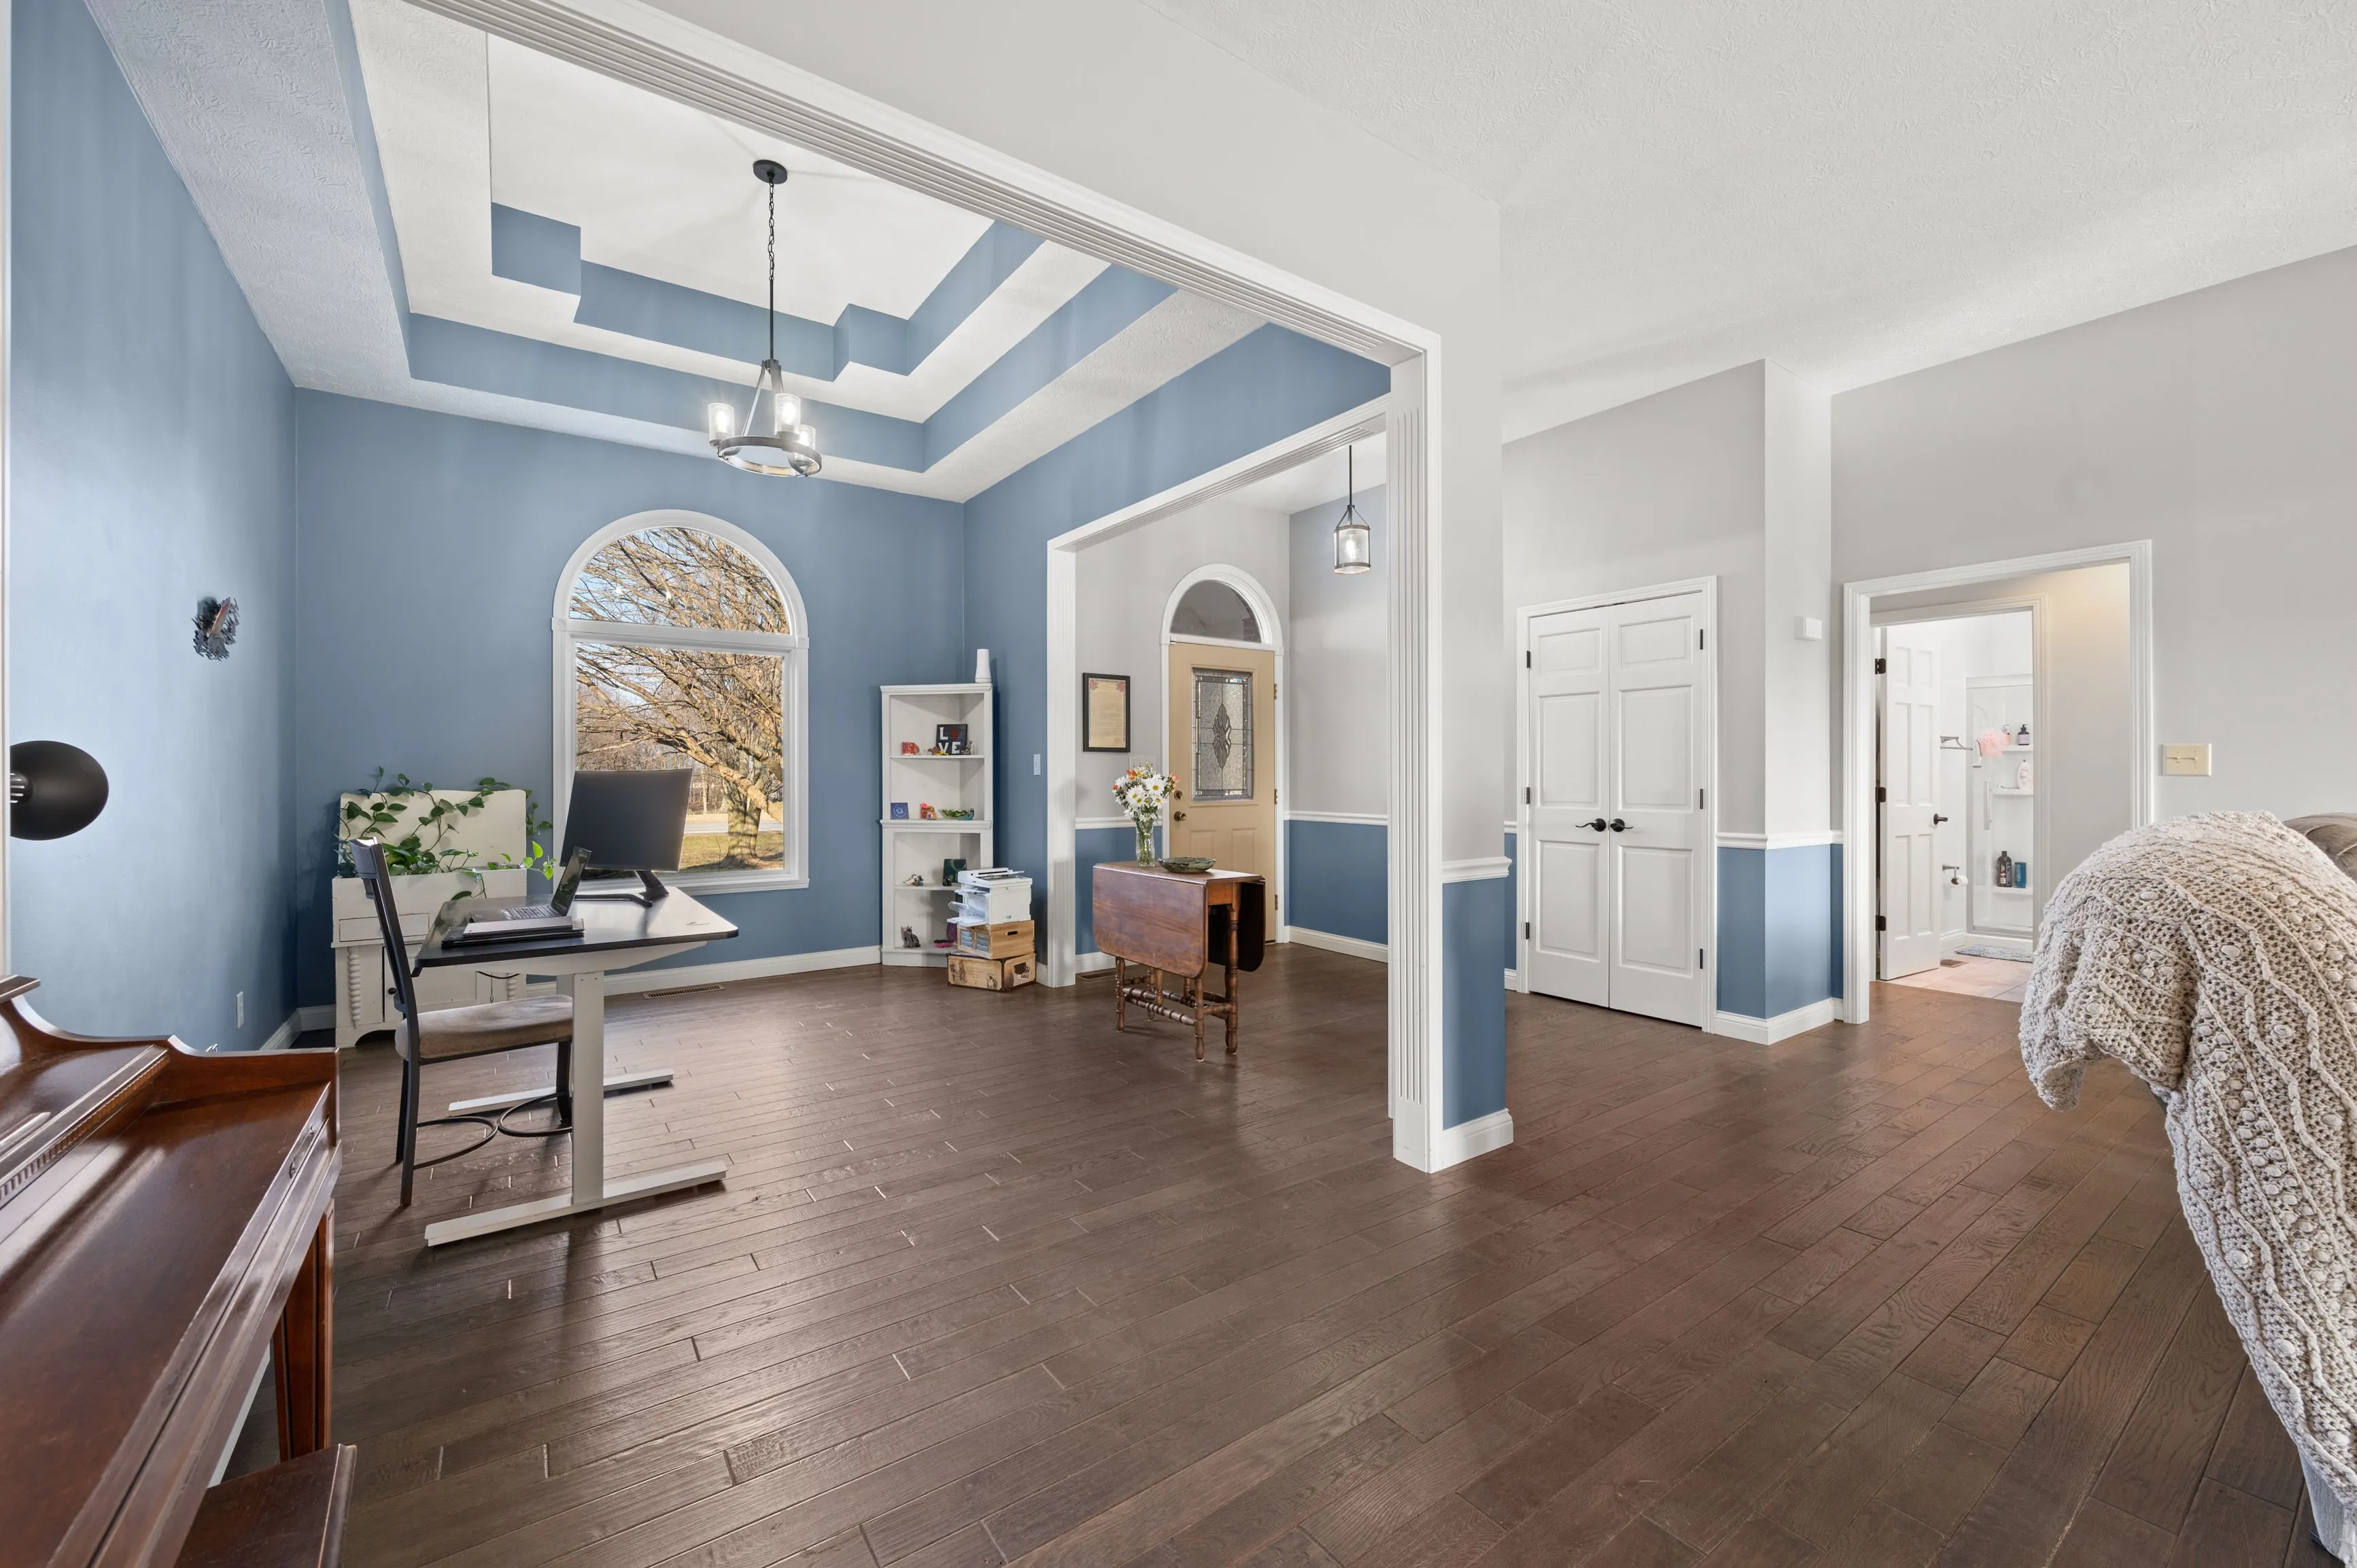 Bright and spacious room with blue walls, white trim, dark wooden flooring, and contemporary furniture including a standing desk and piano.